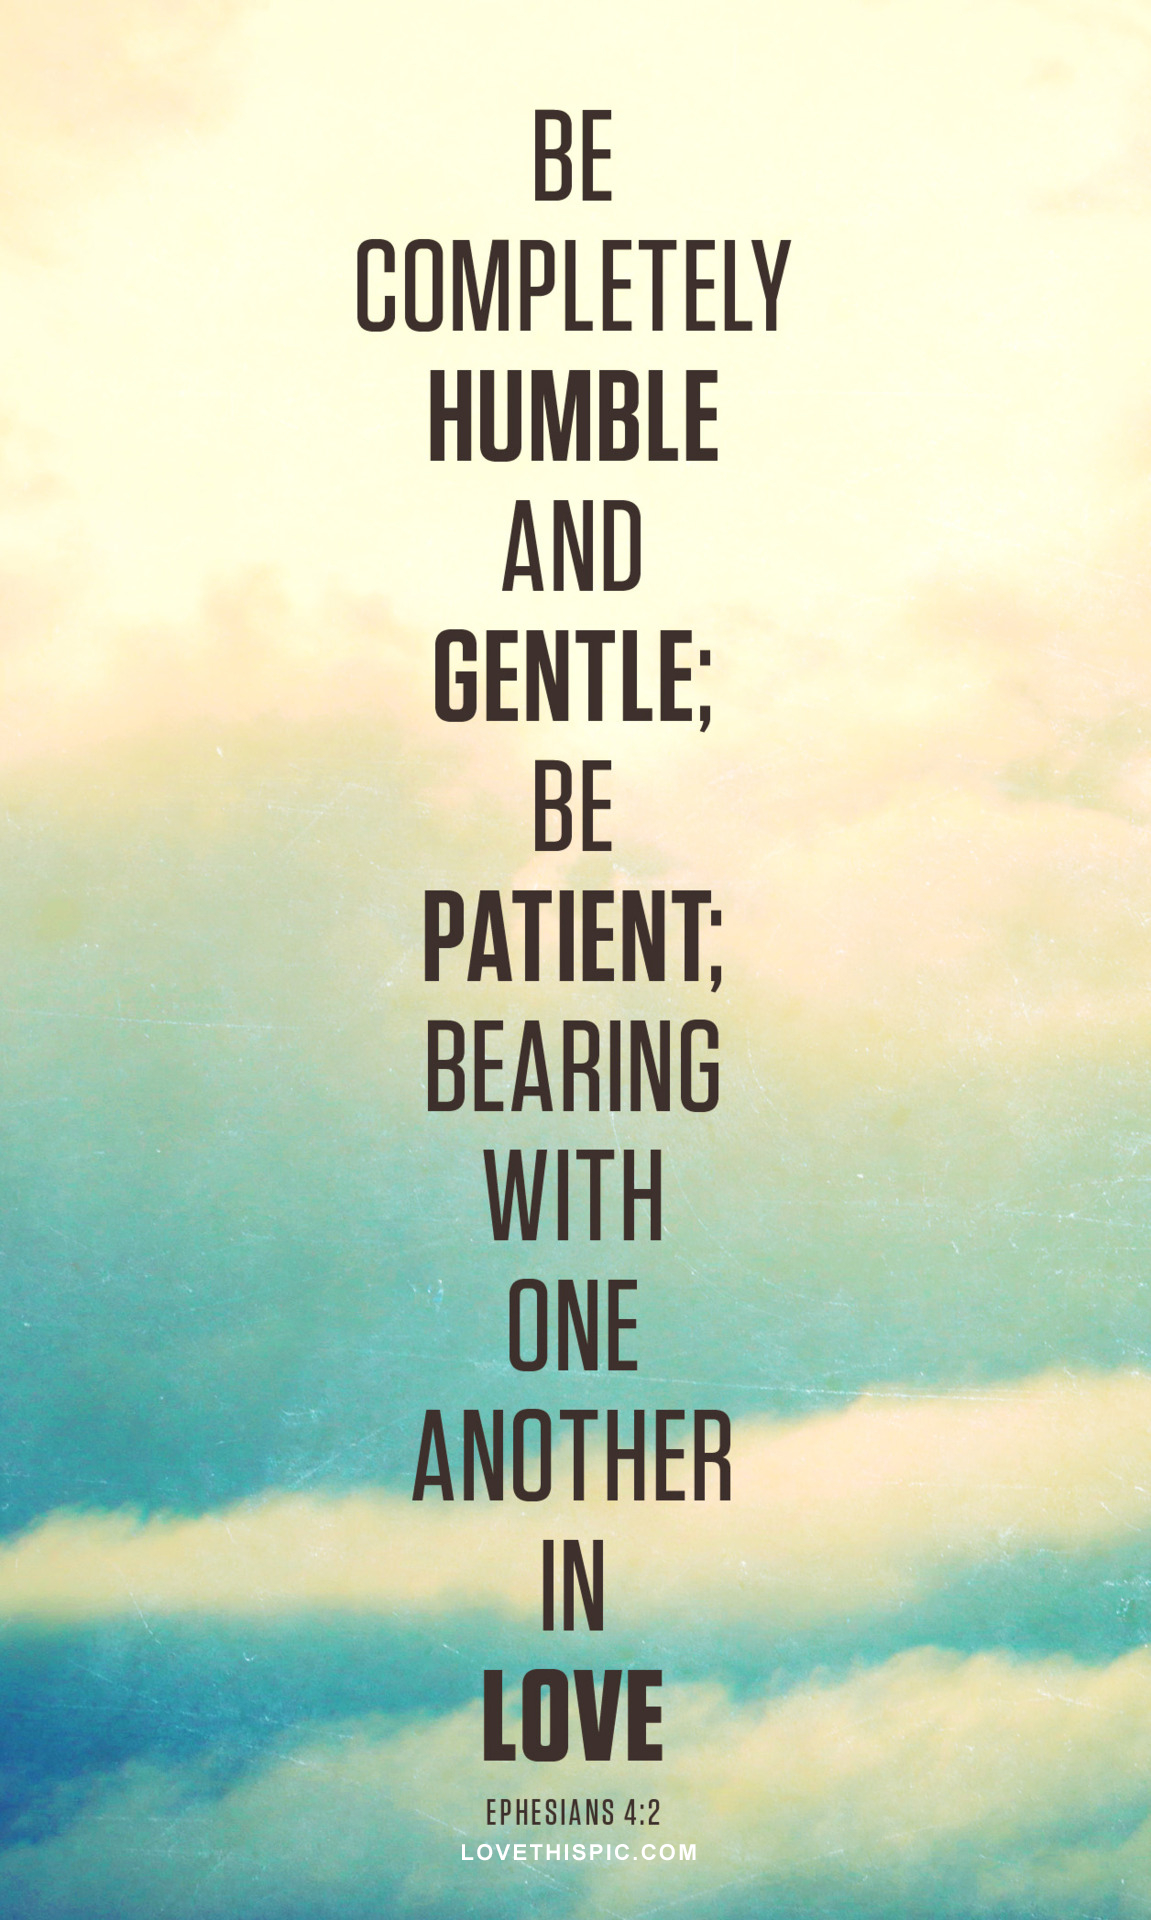 Quotes On Humility And Humbleness. QuotesGram